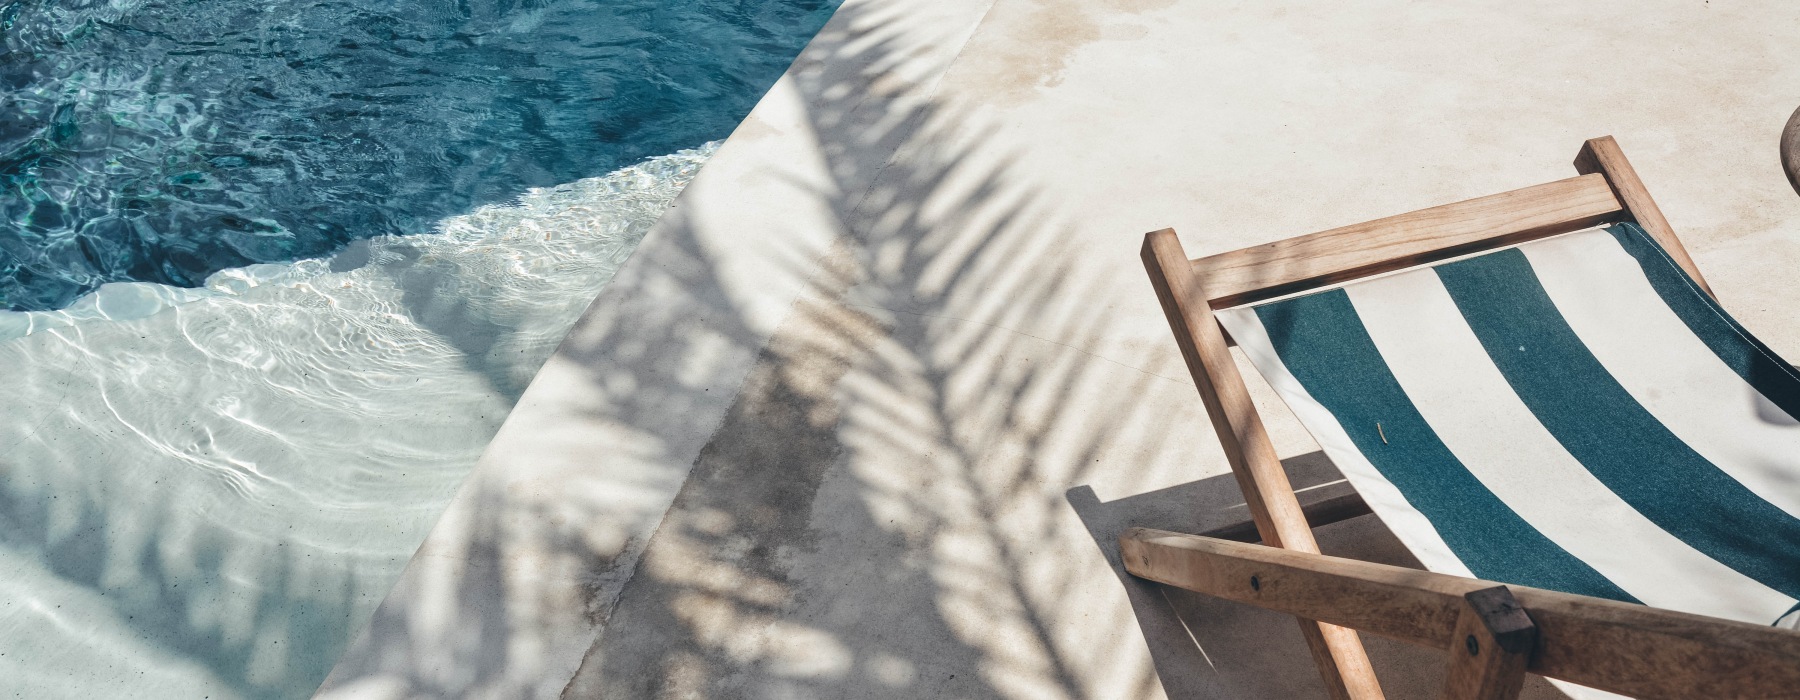 Stripped chair next to a swimming pool